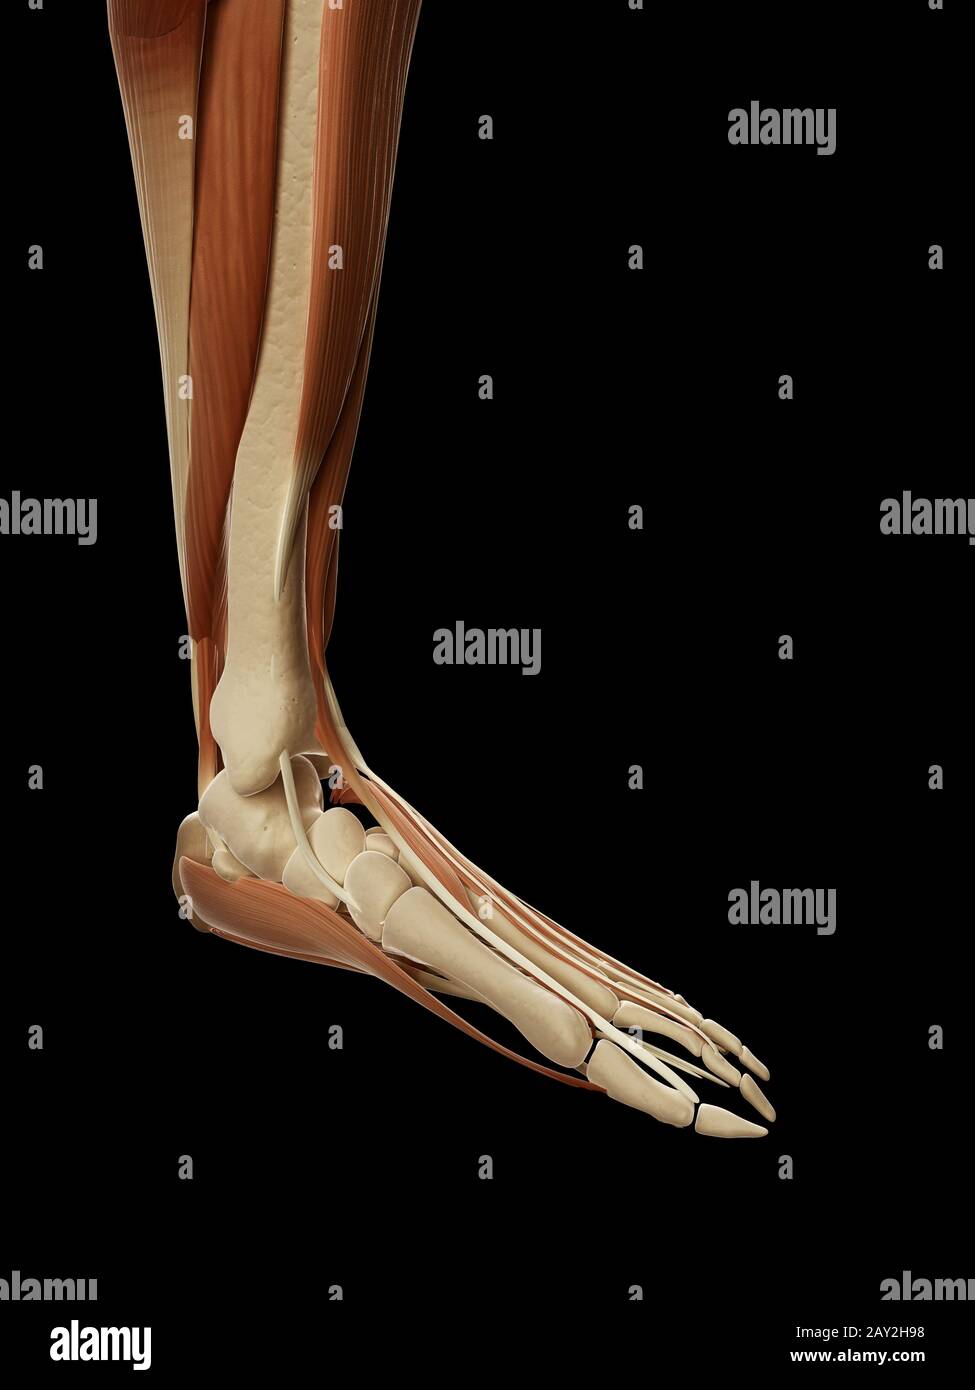 medical illustration of the leg/foot muscles Stock Photo